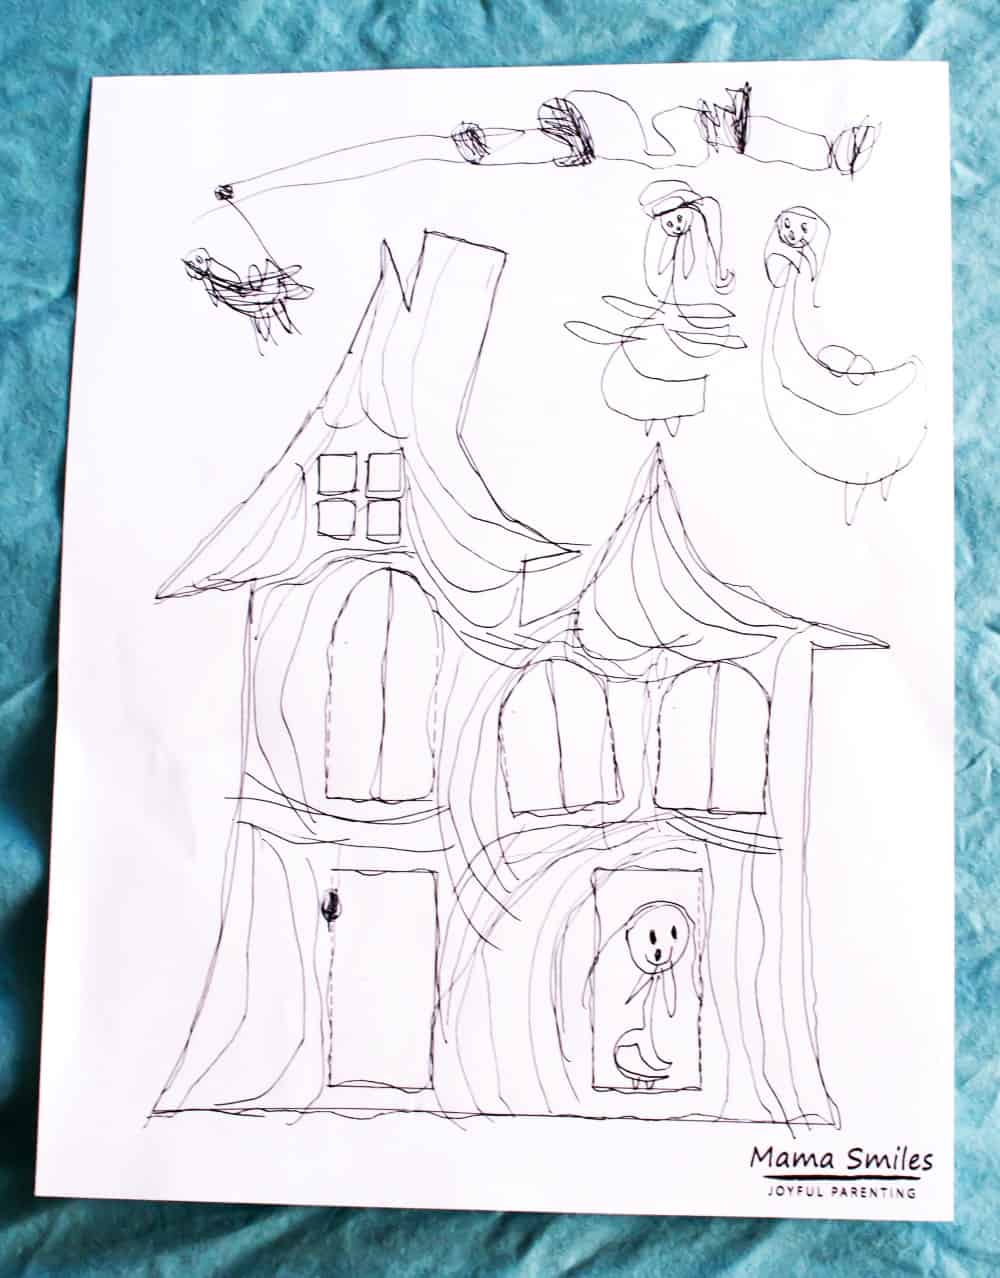 This haunted house printable is wonderful for encouraging creative story telling!